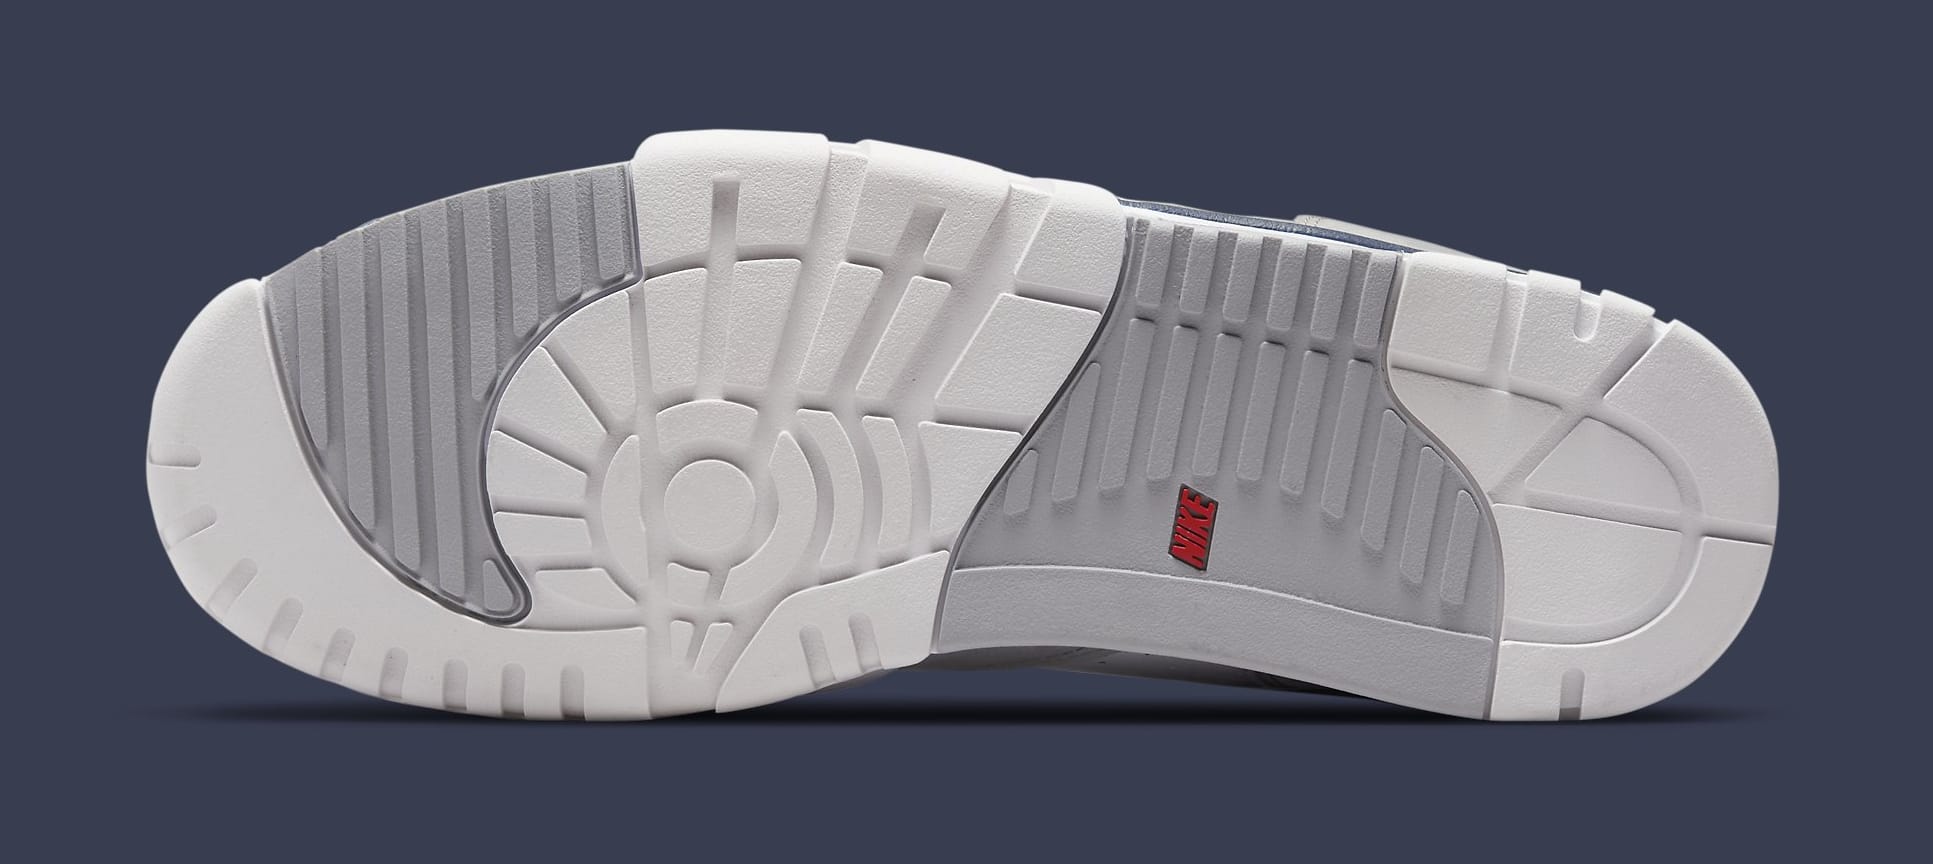 More All-White Finishes: Nike Air Trainer 1 •